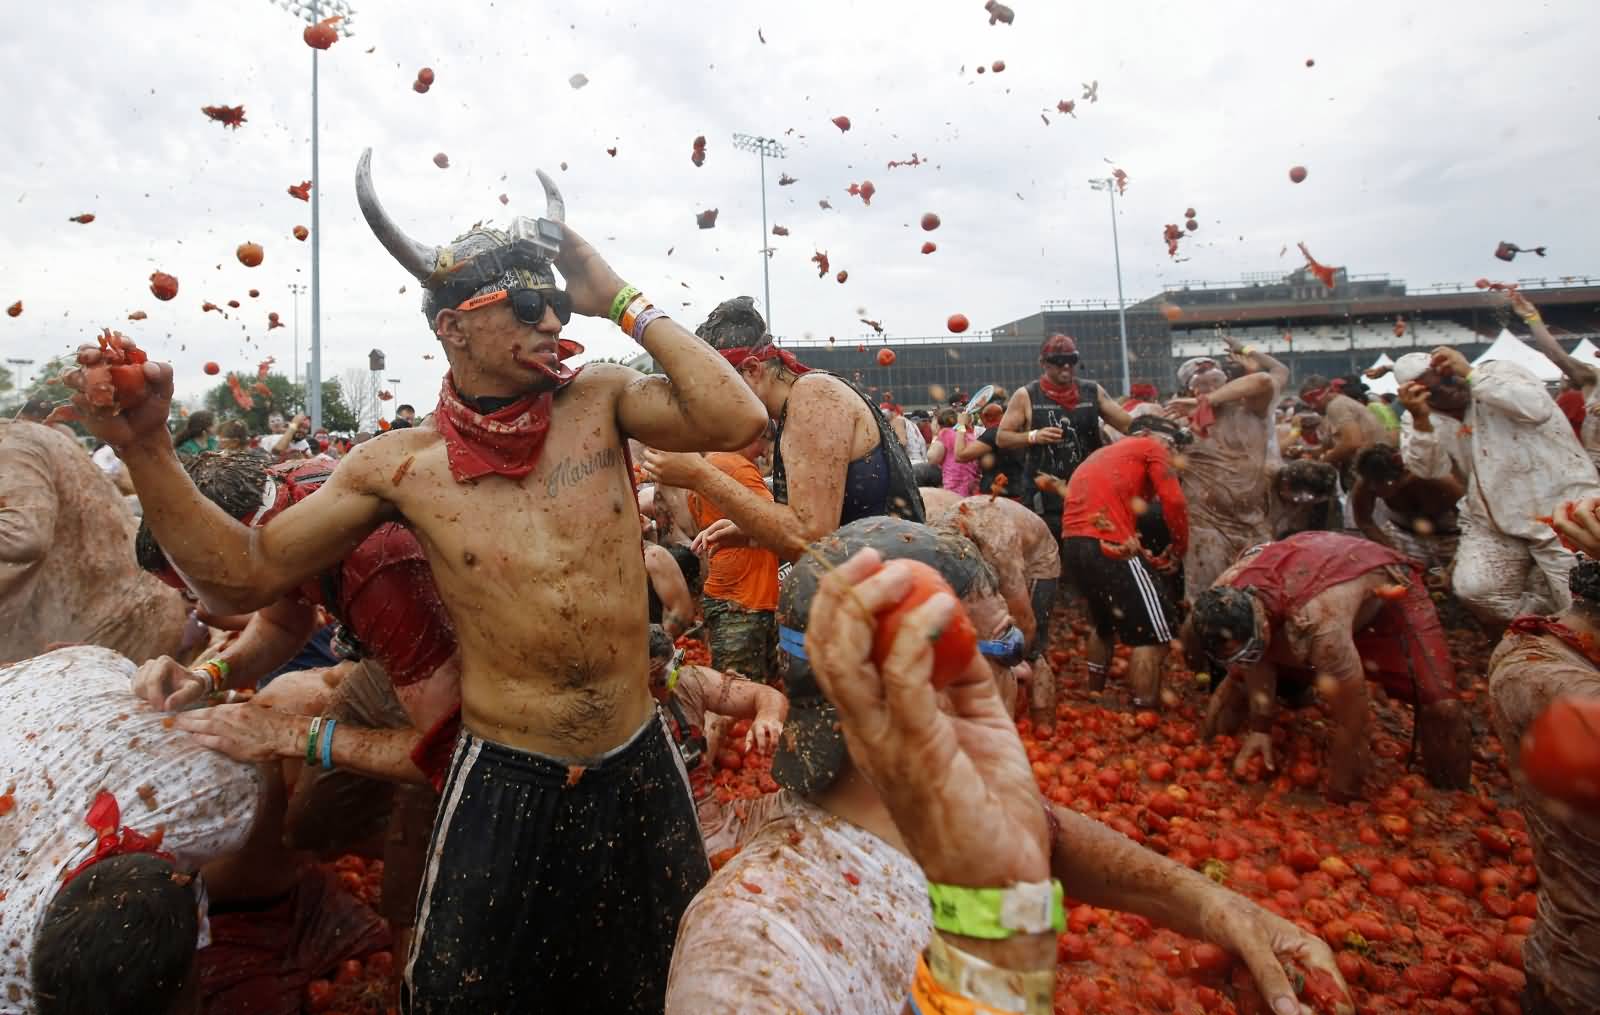 People Throwing Tomatoes On Each Other During La Tomatina Celebration